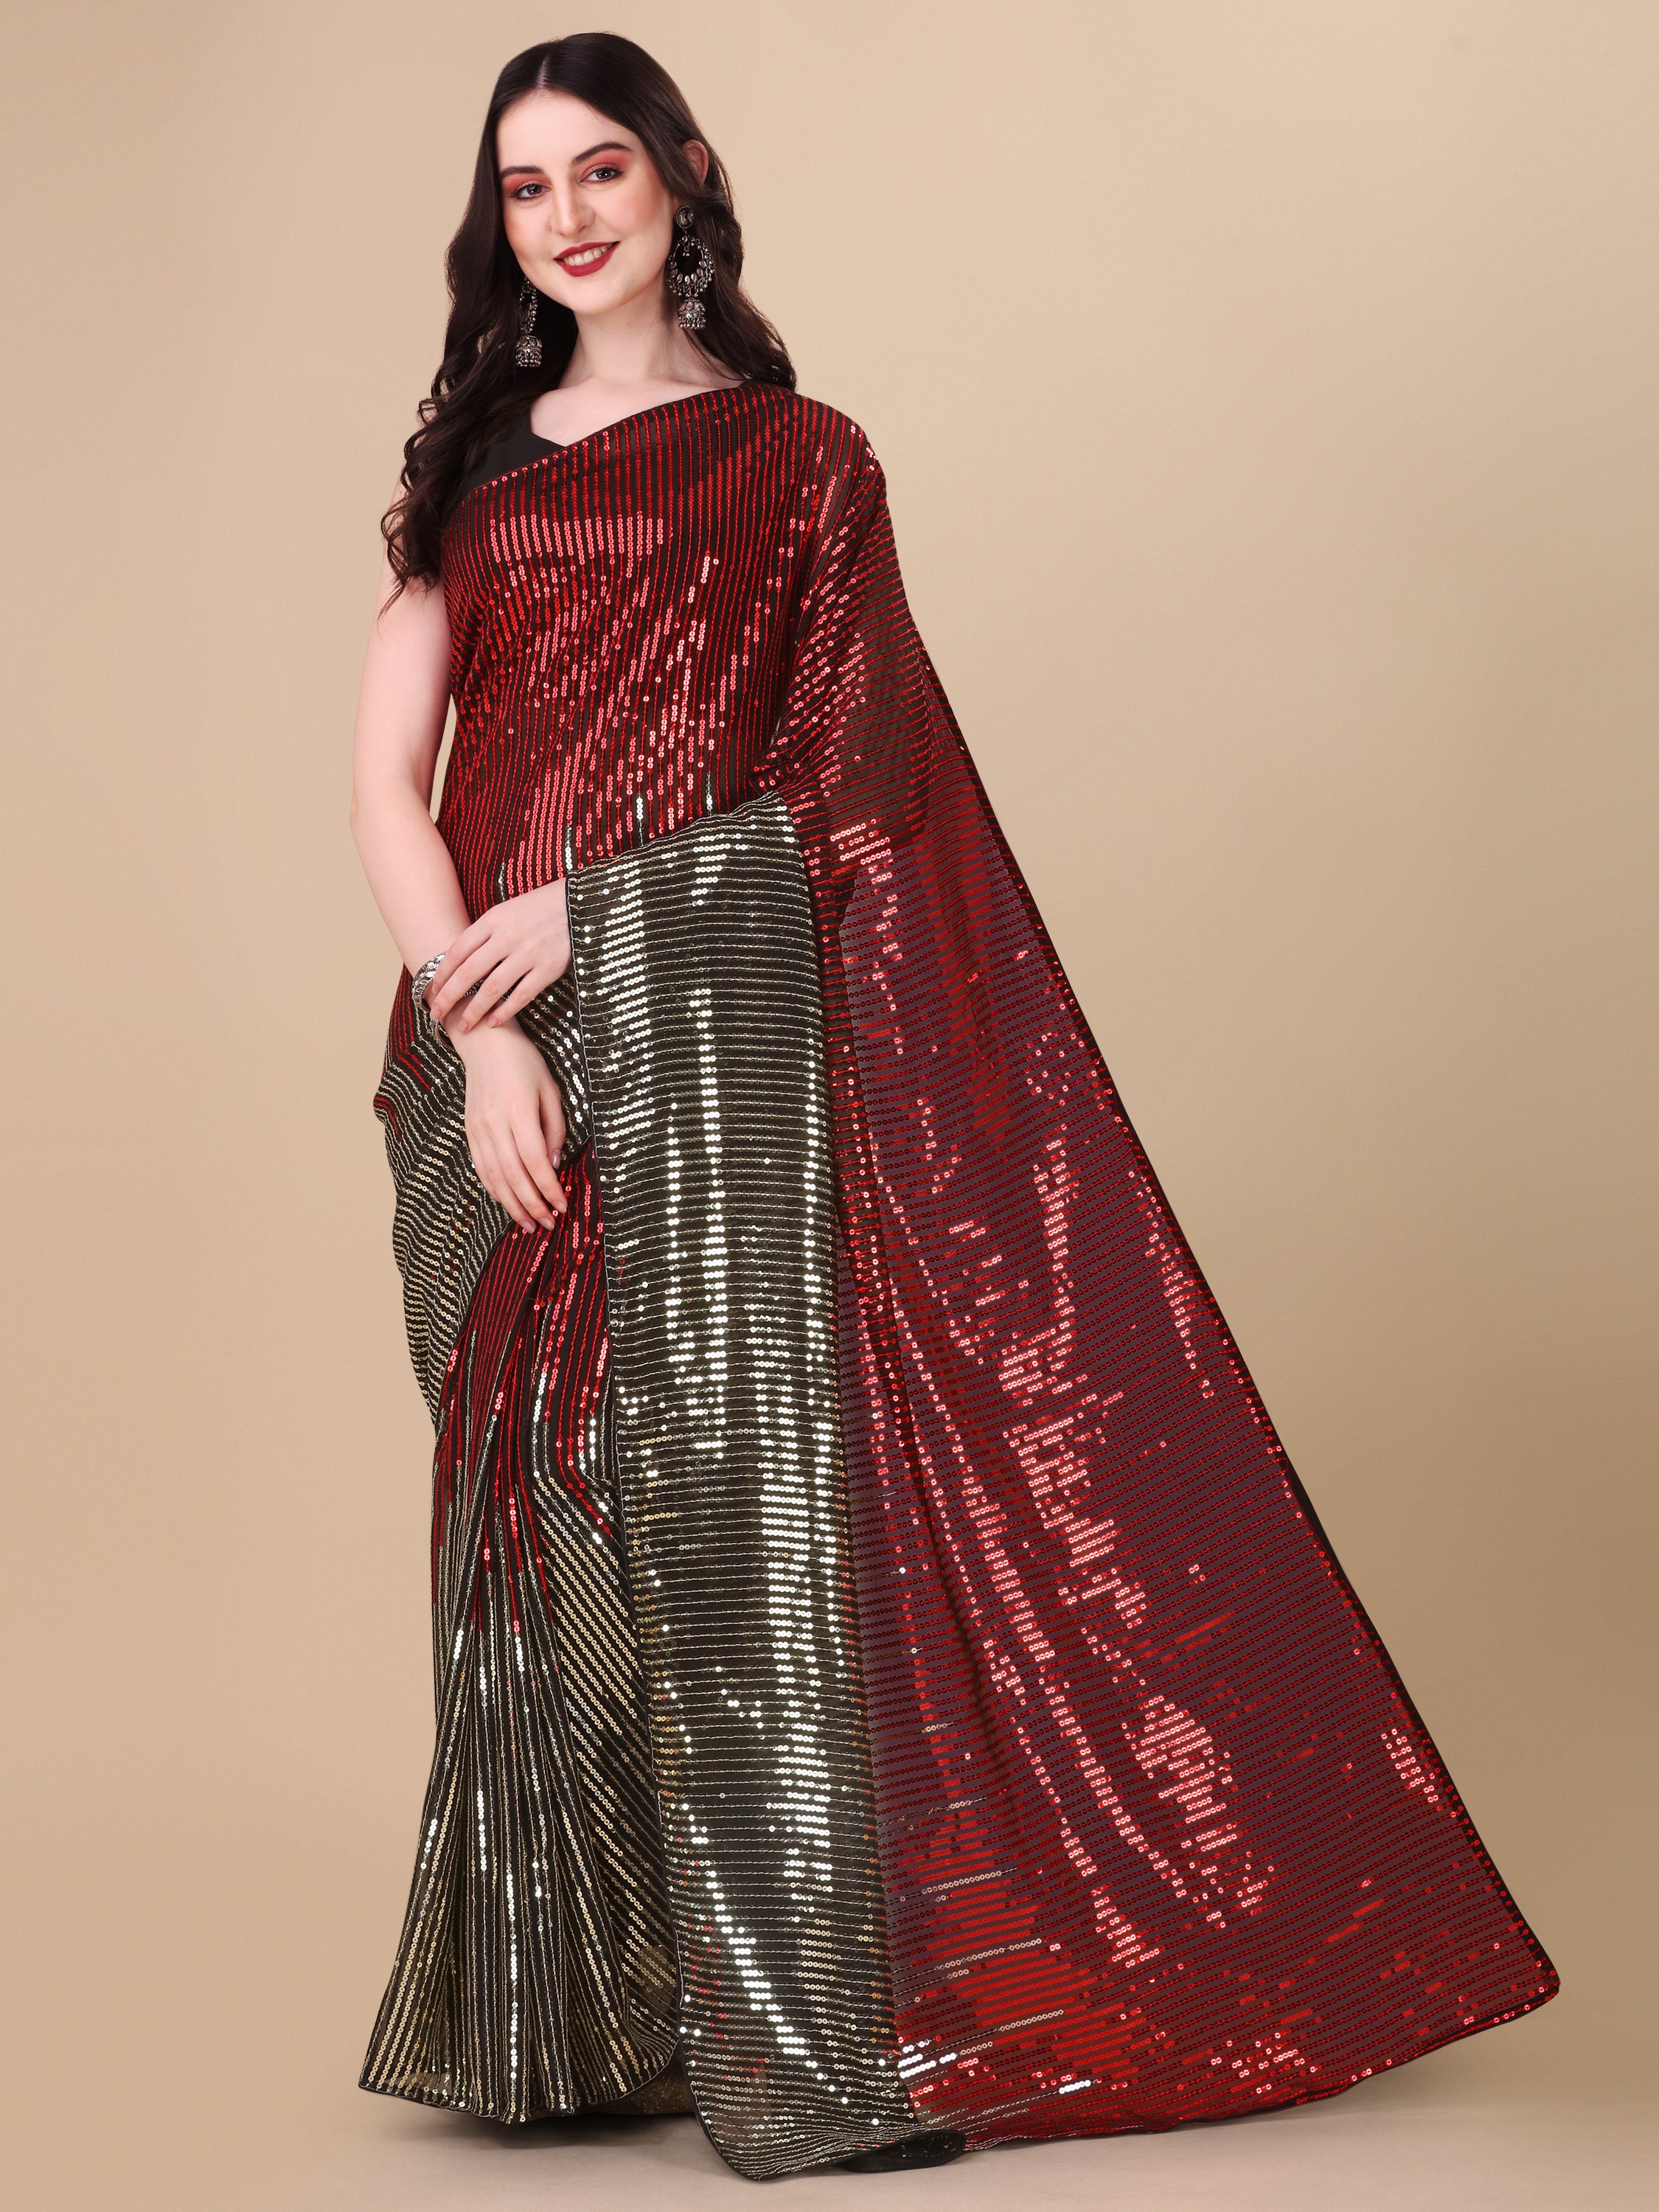 Women's Sequin Striped Paty Wear Contemporary Georgette Saree With Blouse Piece (Maroon) - NIMIDHYA